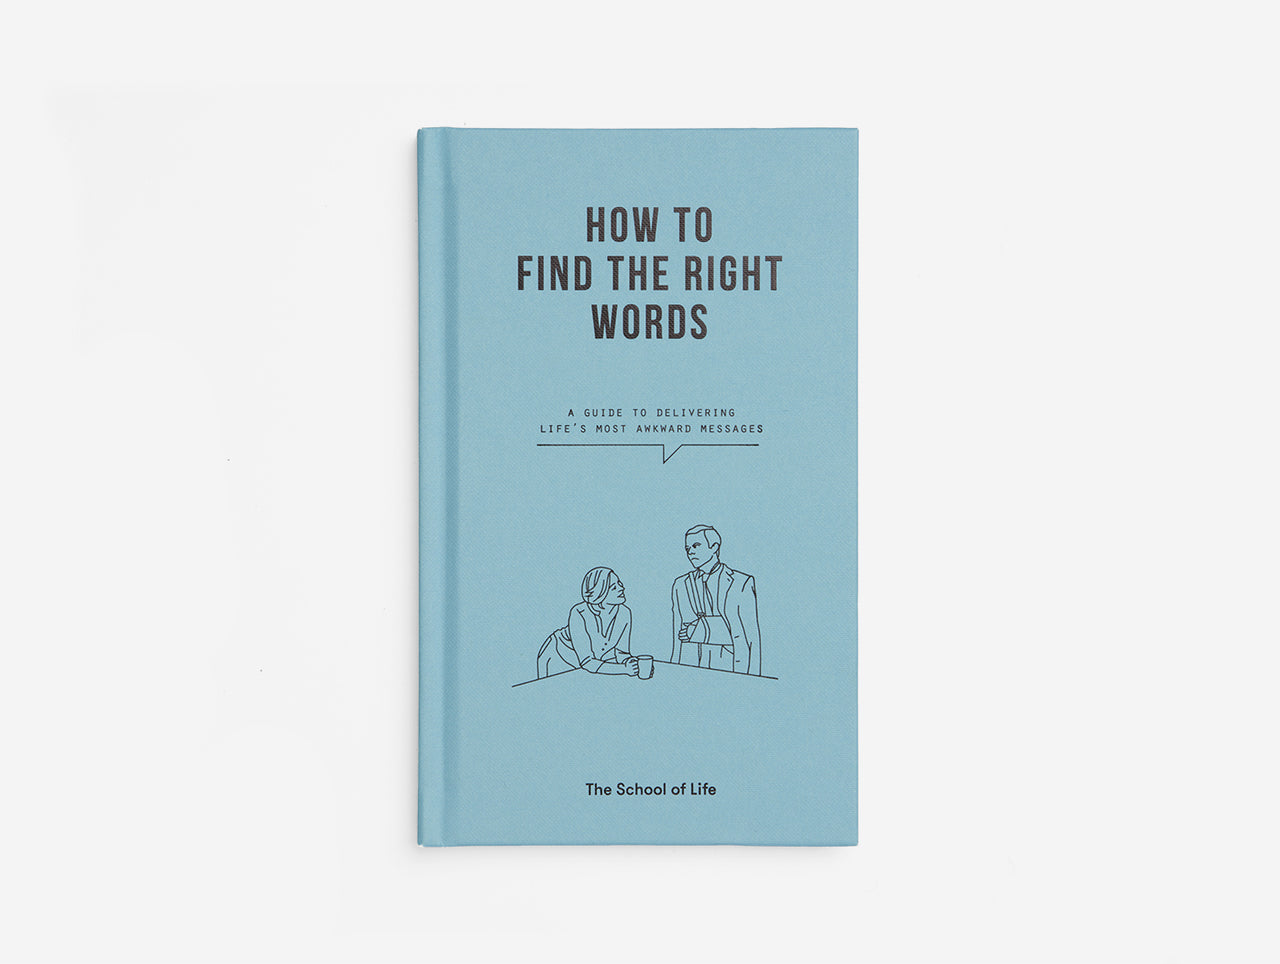 The School of Life - How to Find the Right Words